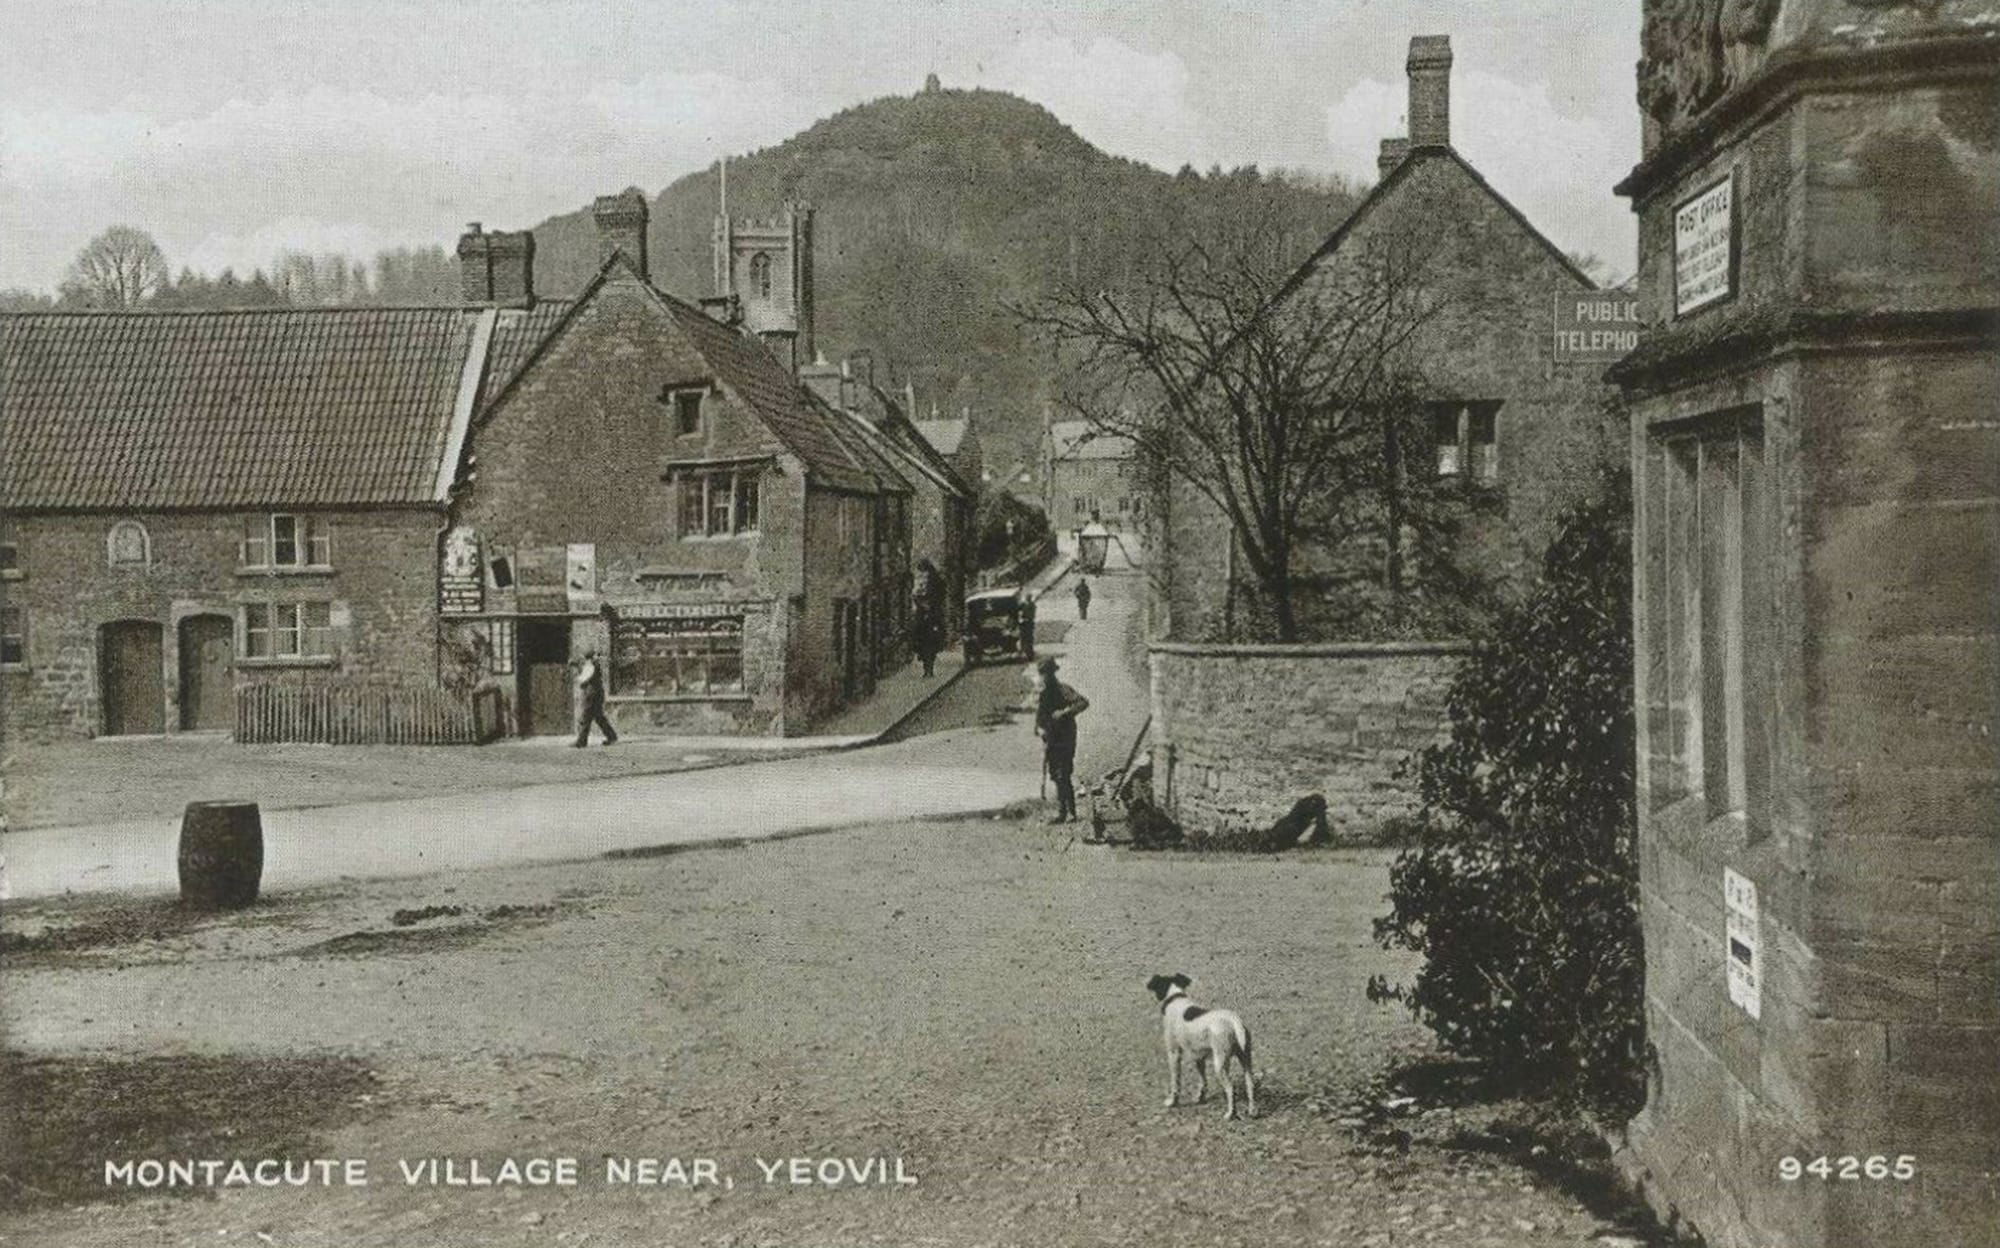 sepia postcard of Montacute taken by the chantry which has a 'post office' plaque. There is a dog in the foreground and a wooden barrel by the road. the view looks up middle street to the tower, there are people in the picture and a parked van on middle street.